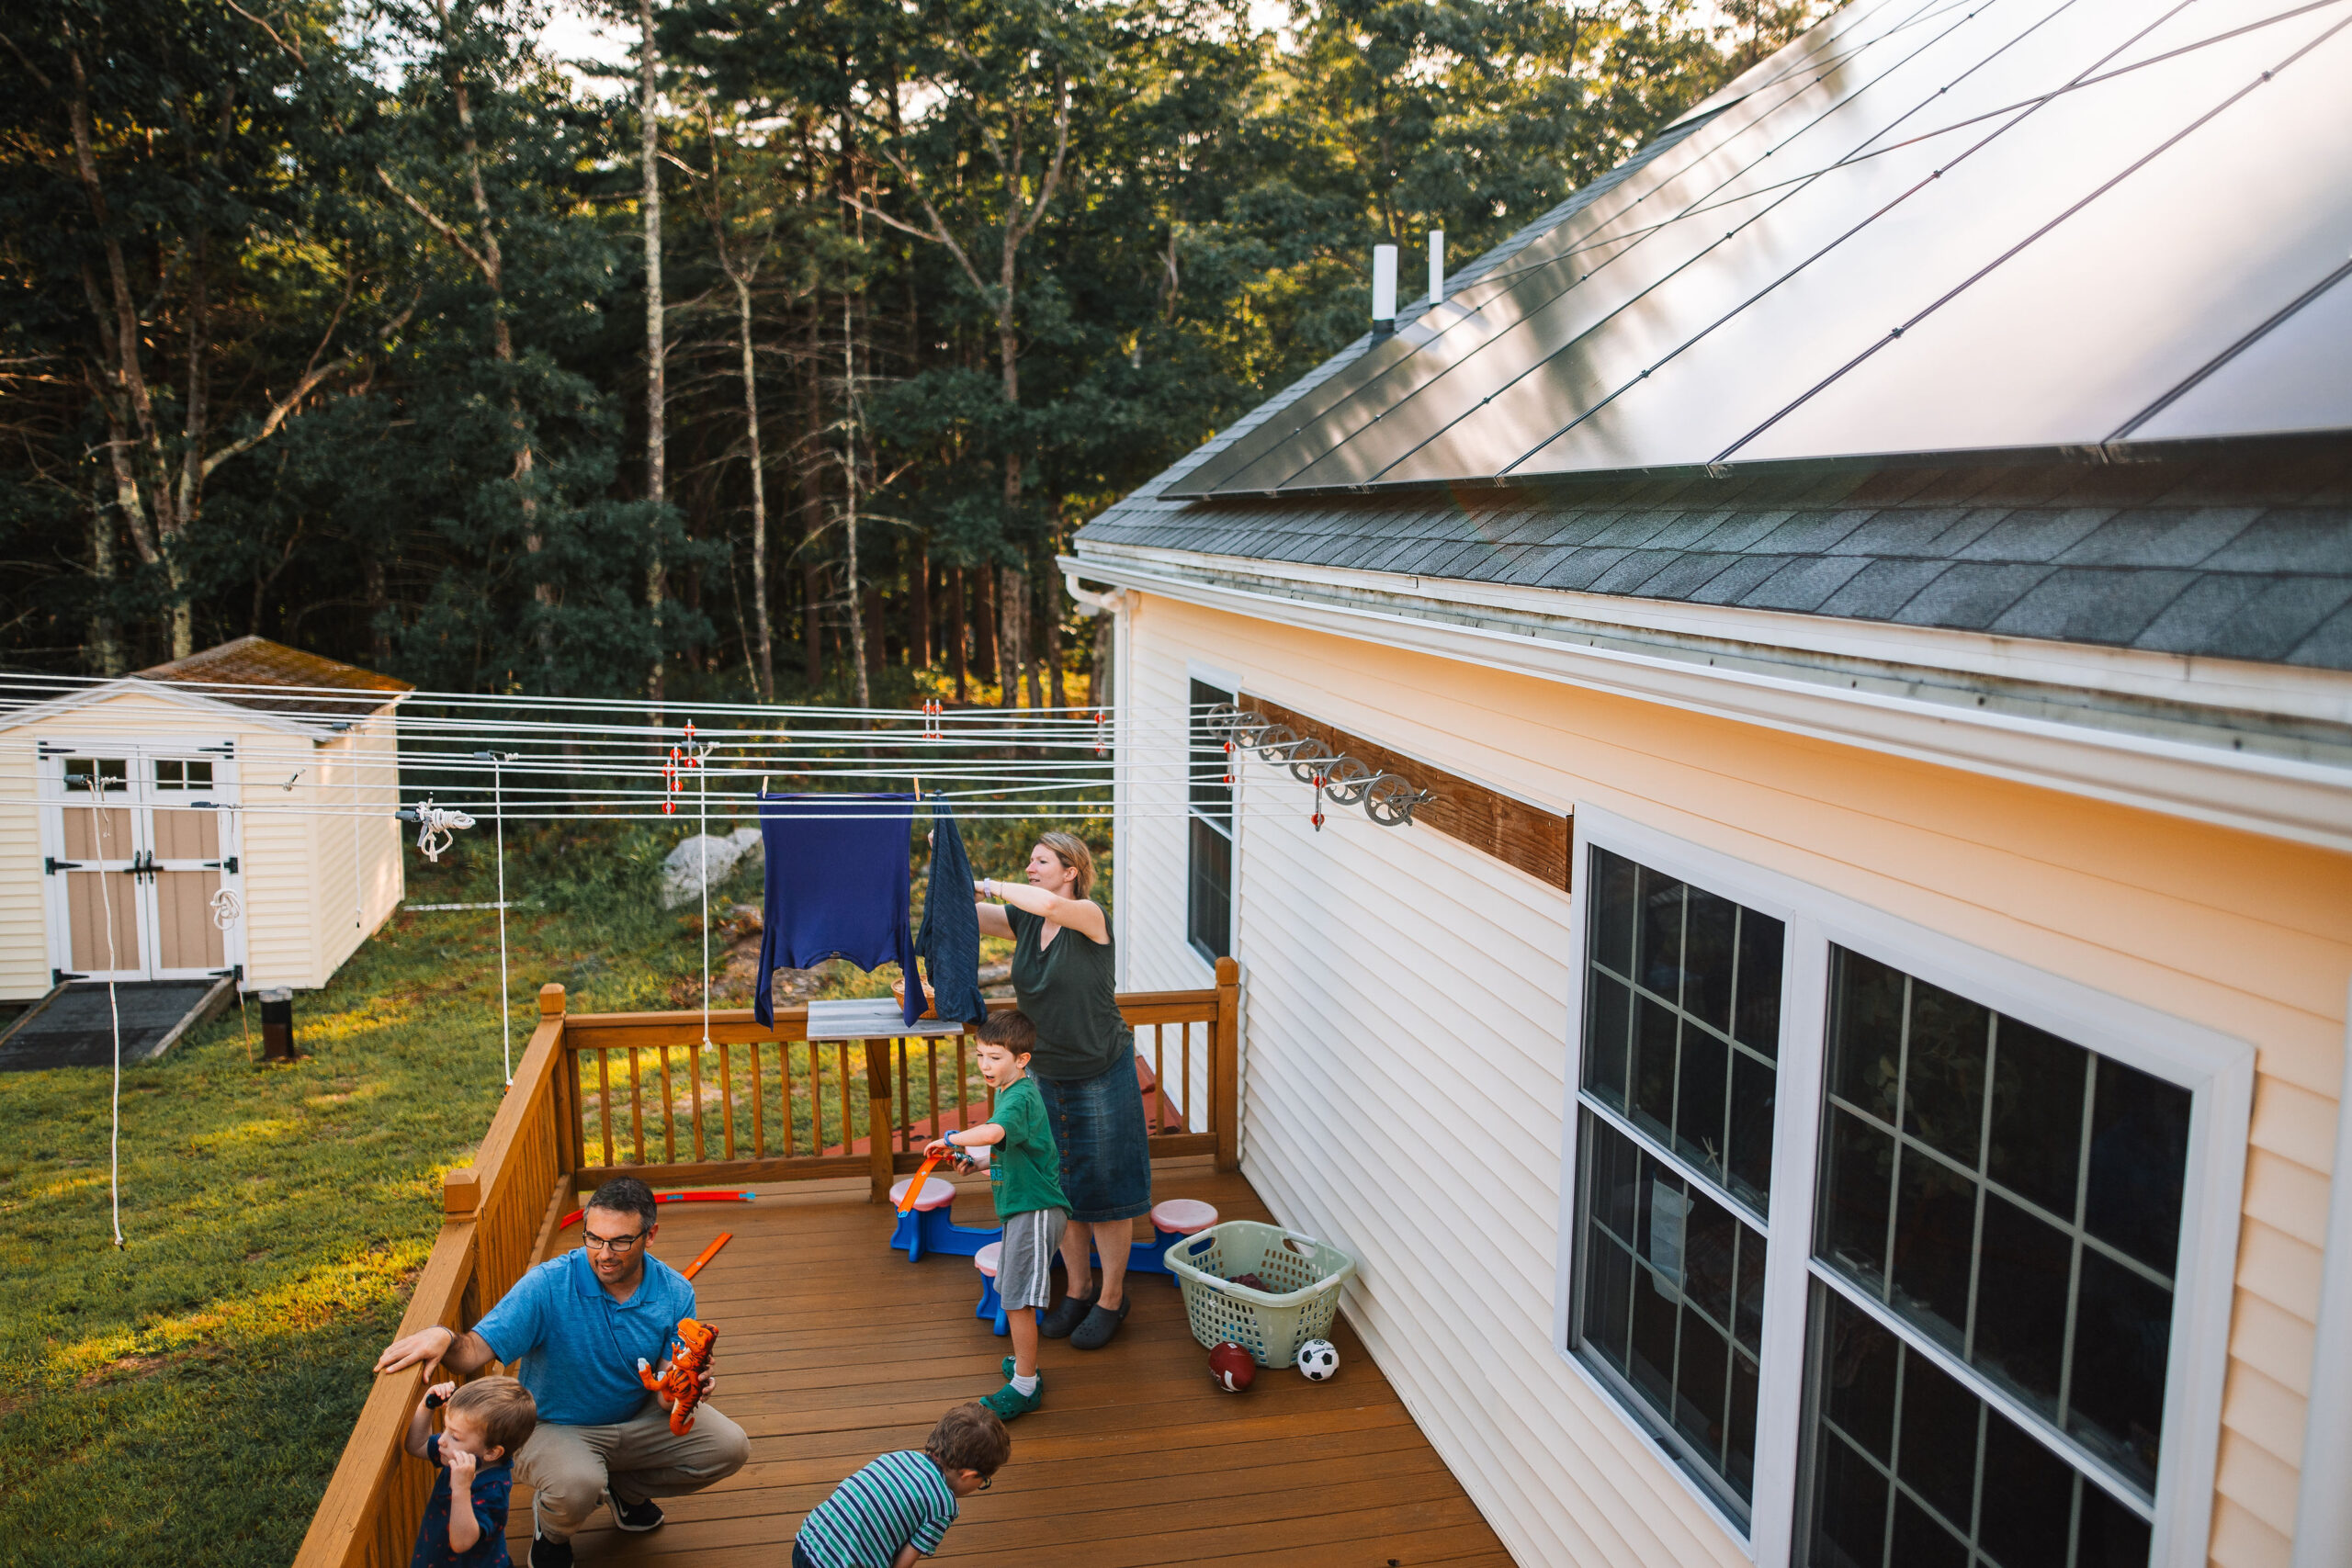 refer your friends and family to sunbug, a revision energy company